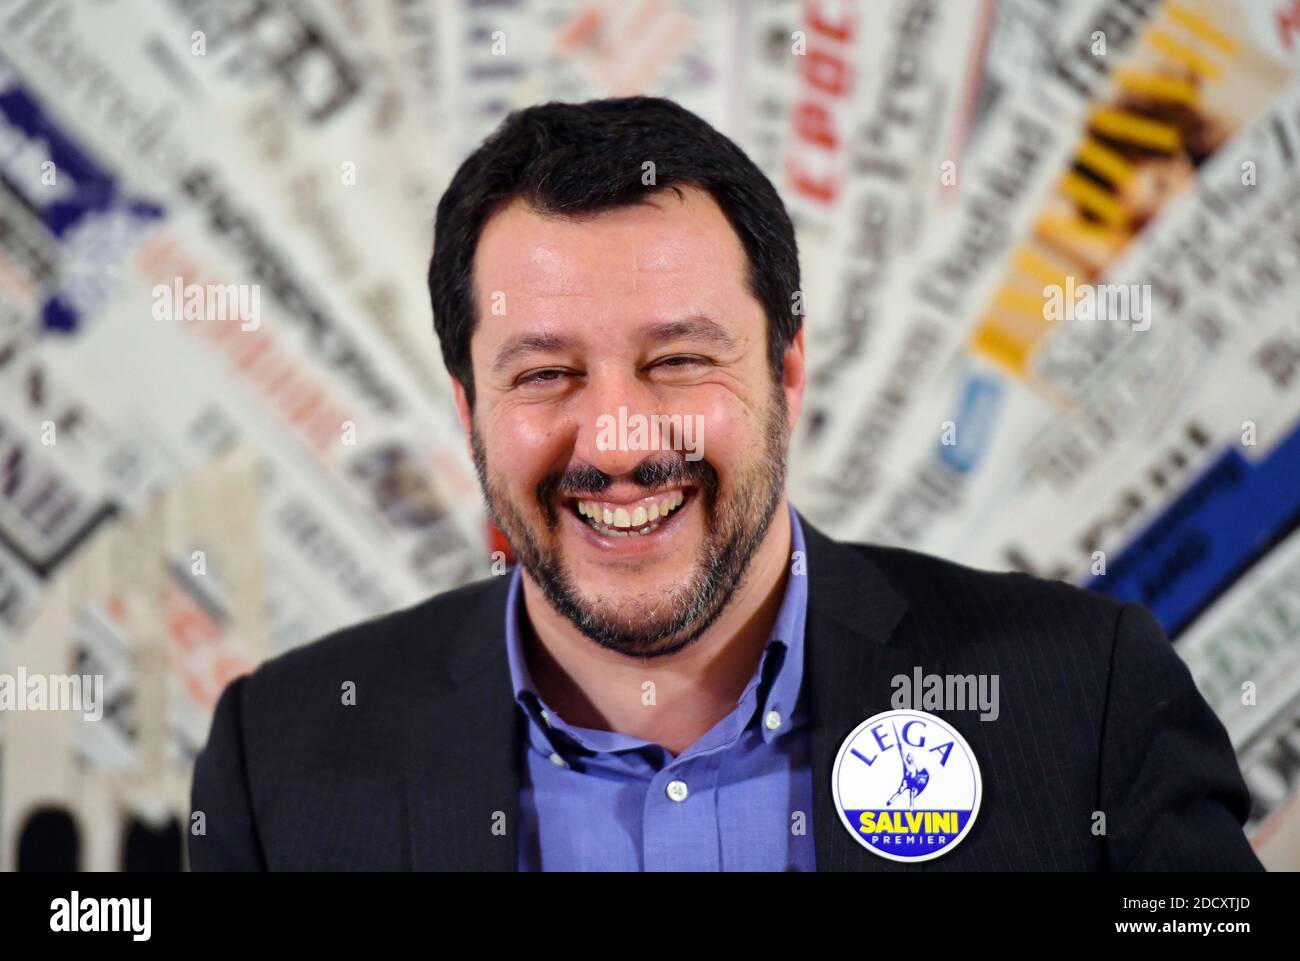 Leader of Italian far-right party Lega Nord (Northern League) Matteo Salvini  attends a press conference at the Foreign Press Association in Rome, Italy  on February 22, 2018. Salvini and his coalition run